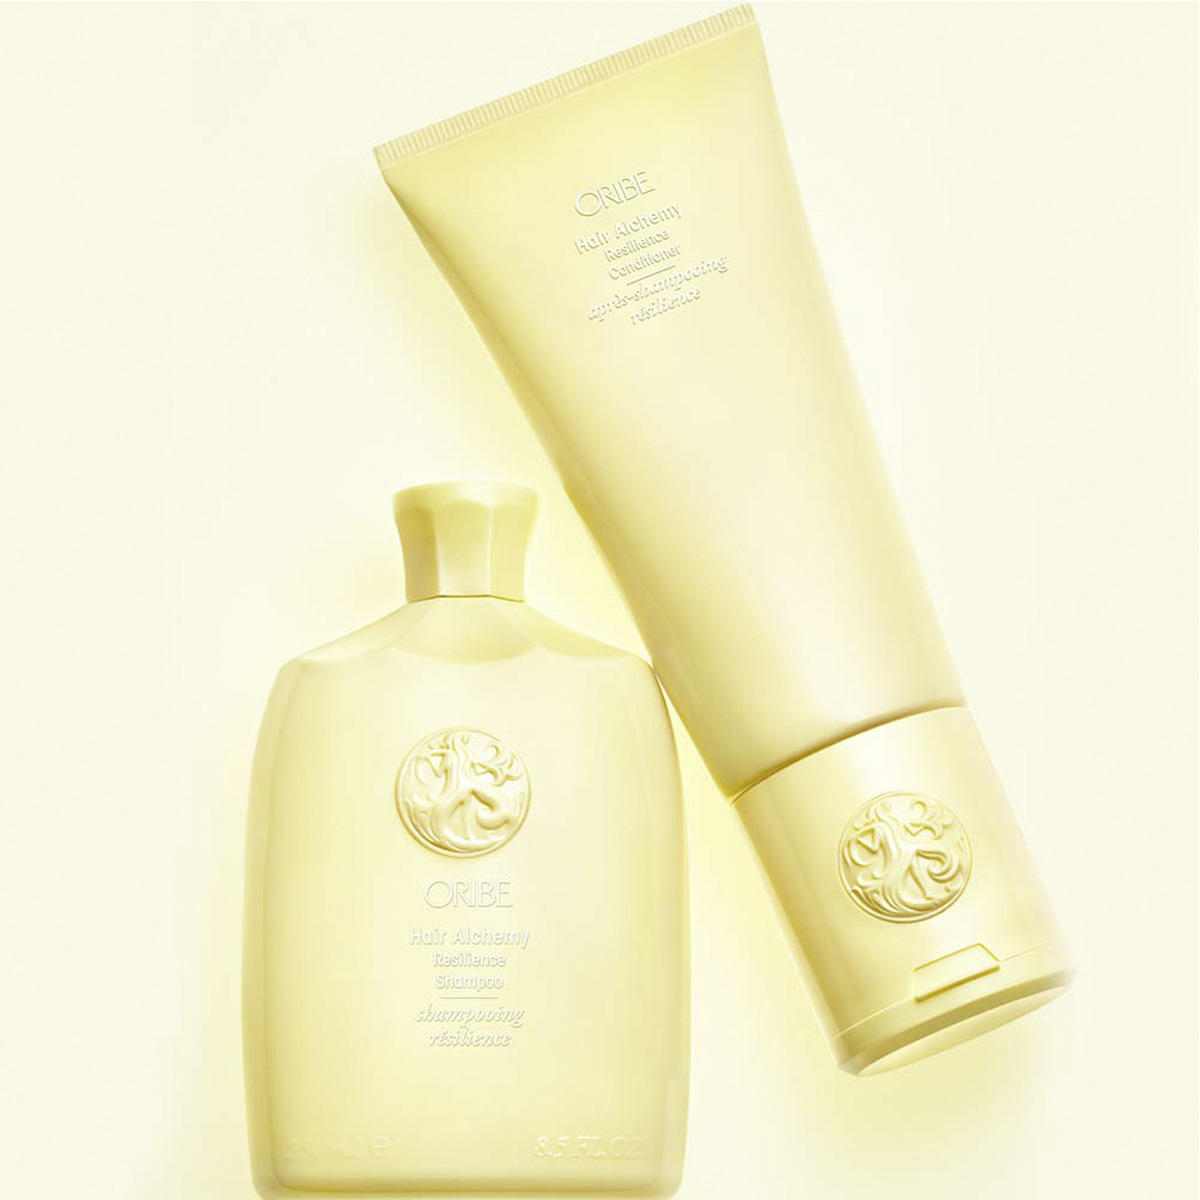 Oribe Hair Alchemy Resilience Conditioner 200 ml - 4